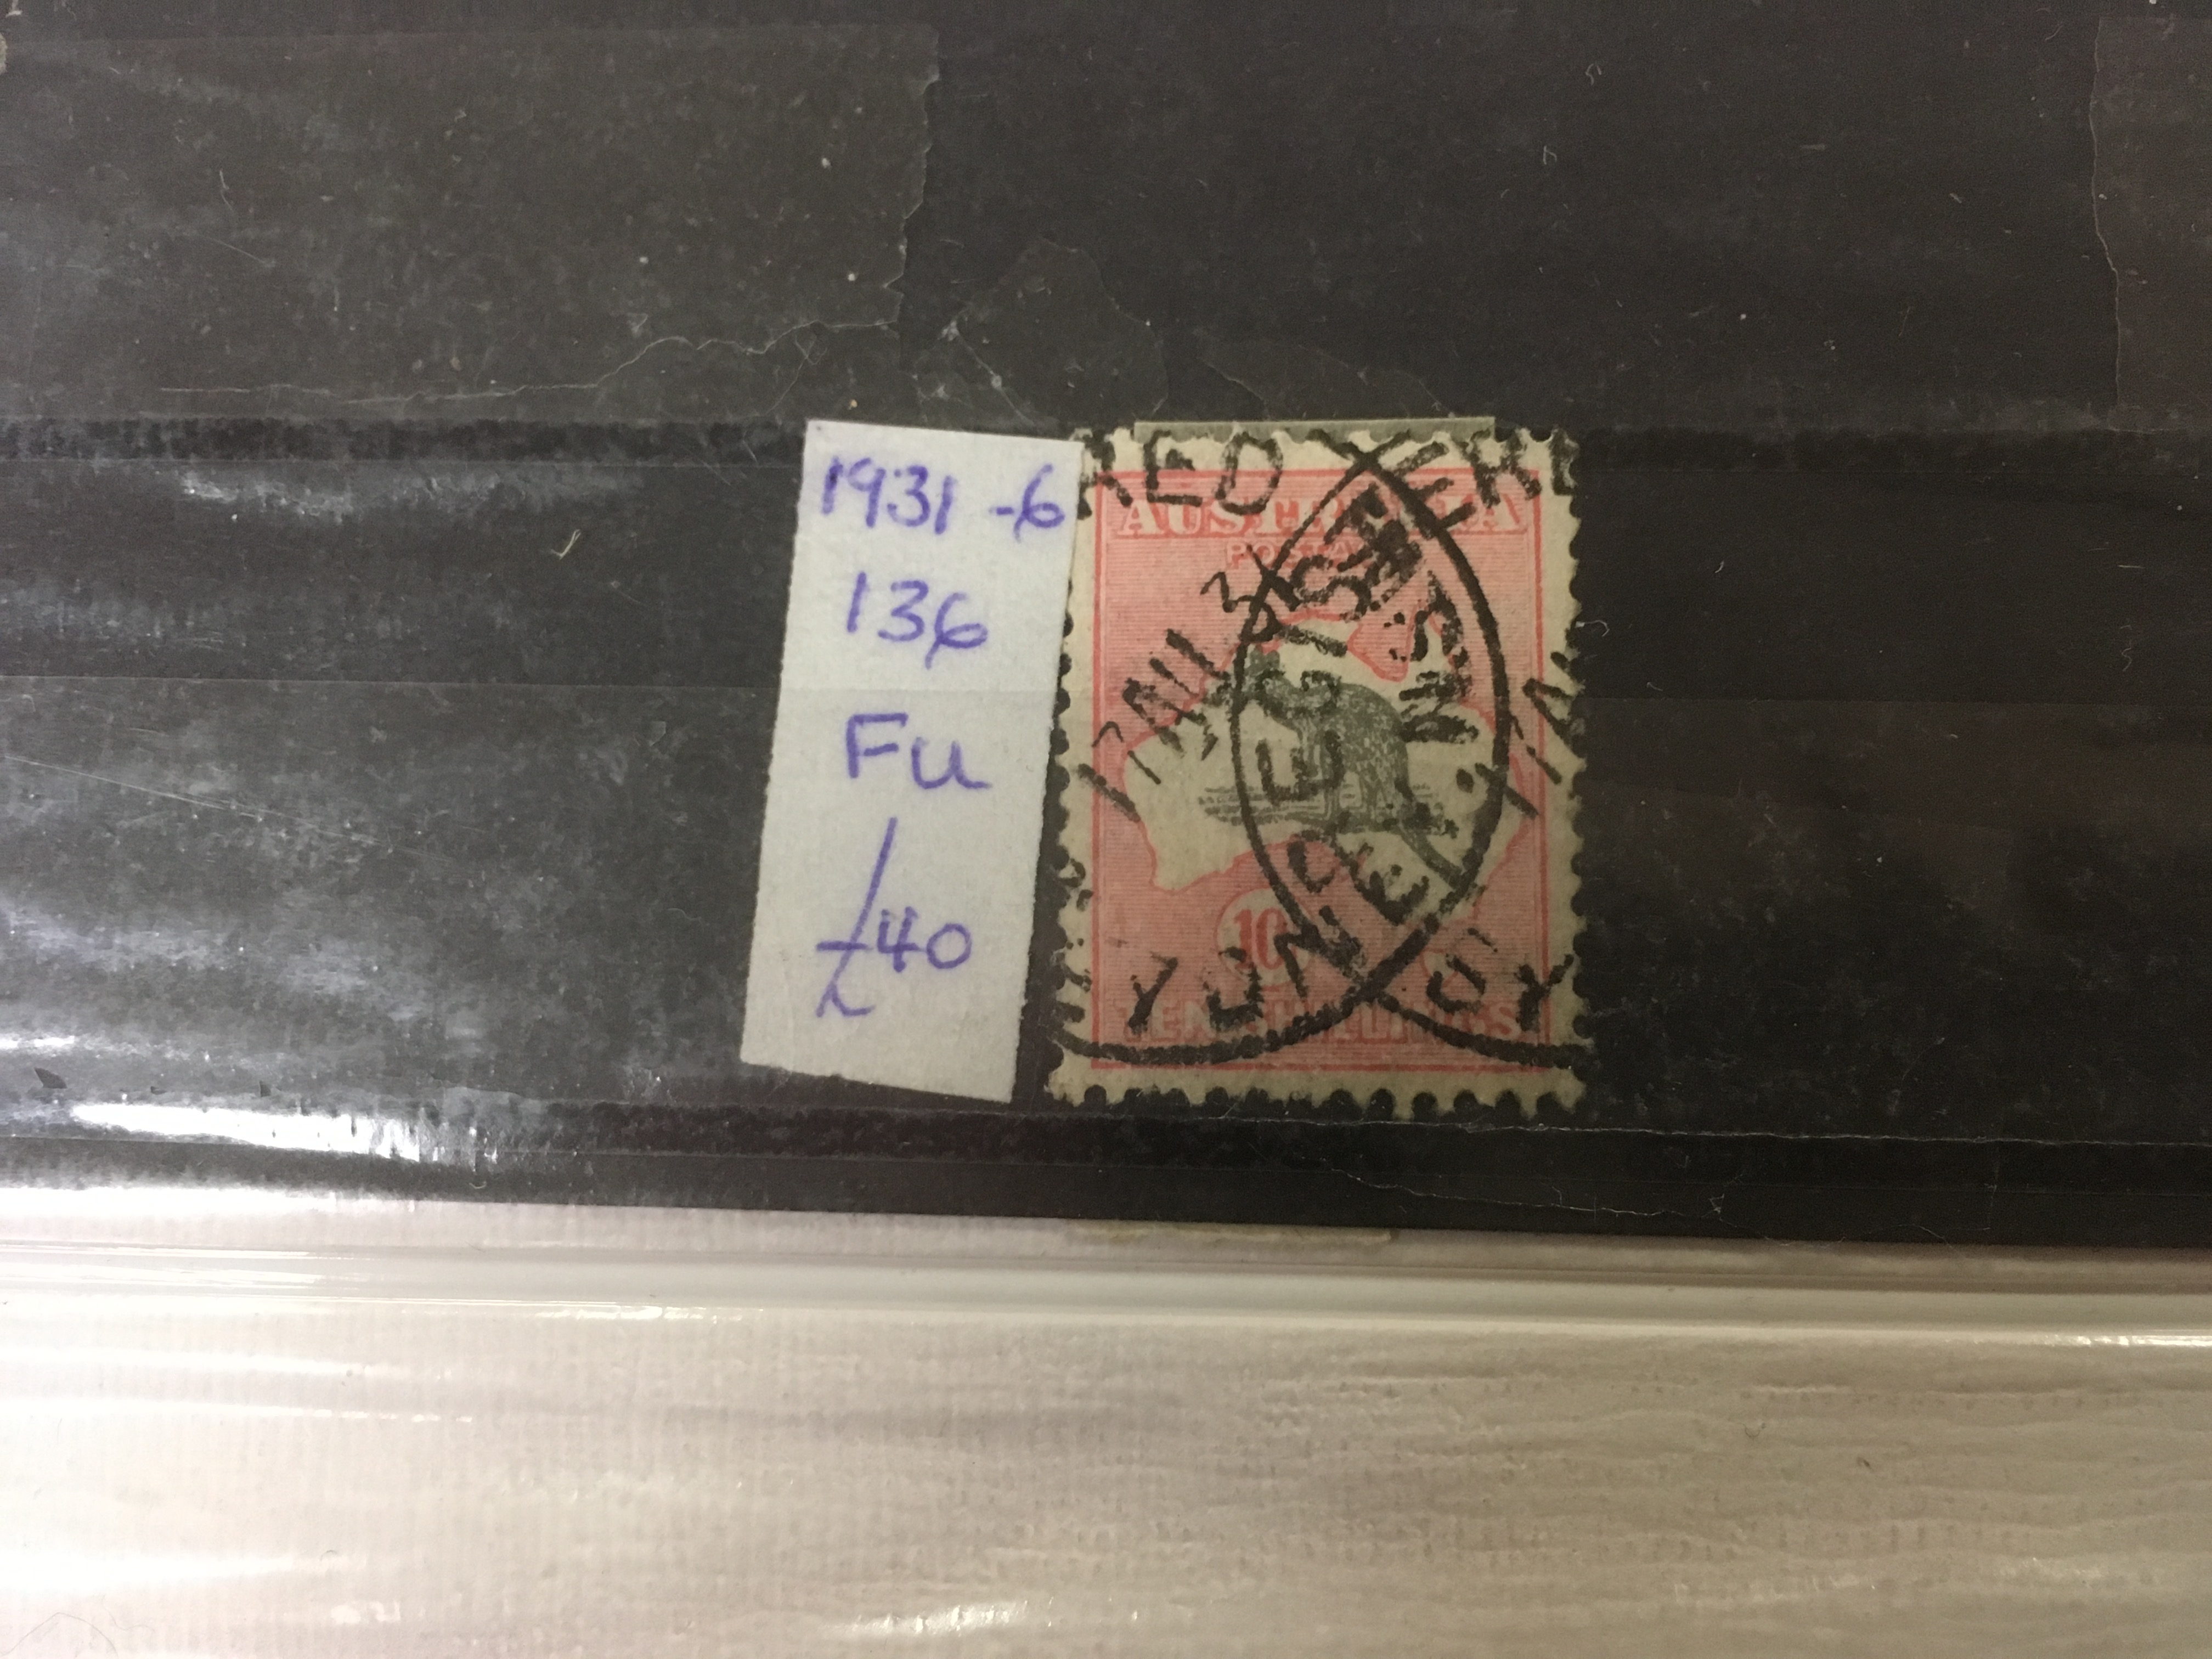 AUSTRALIA: EX DEALER'S STOCK OF SETS AND SINGLES ON PAGES, - Image 3 of 10